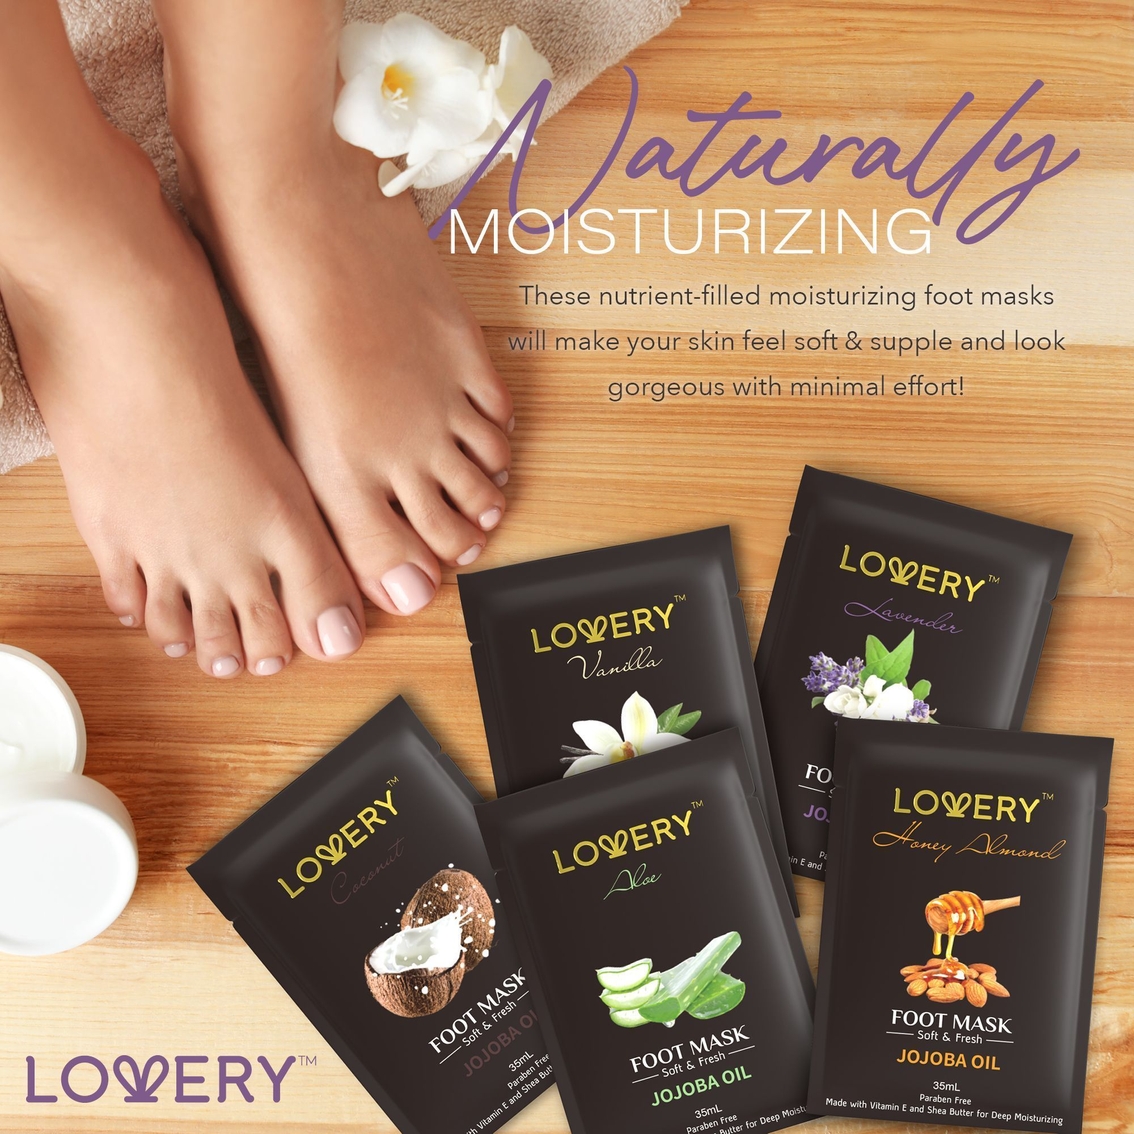 Lovery Deep Conditioning Foot Masks with Vitamine E, Shea Butter & Jojoba Oil - 5pk - Image 4 of 4